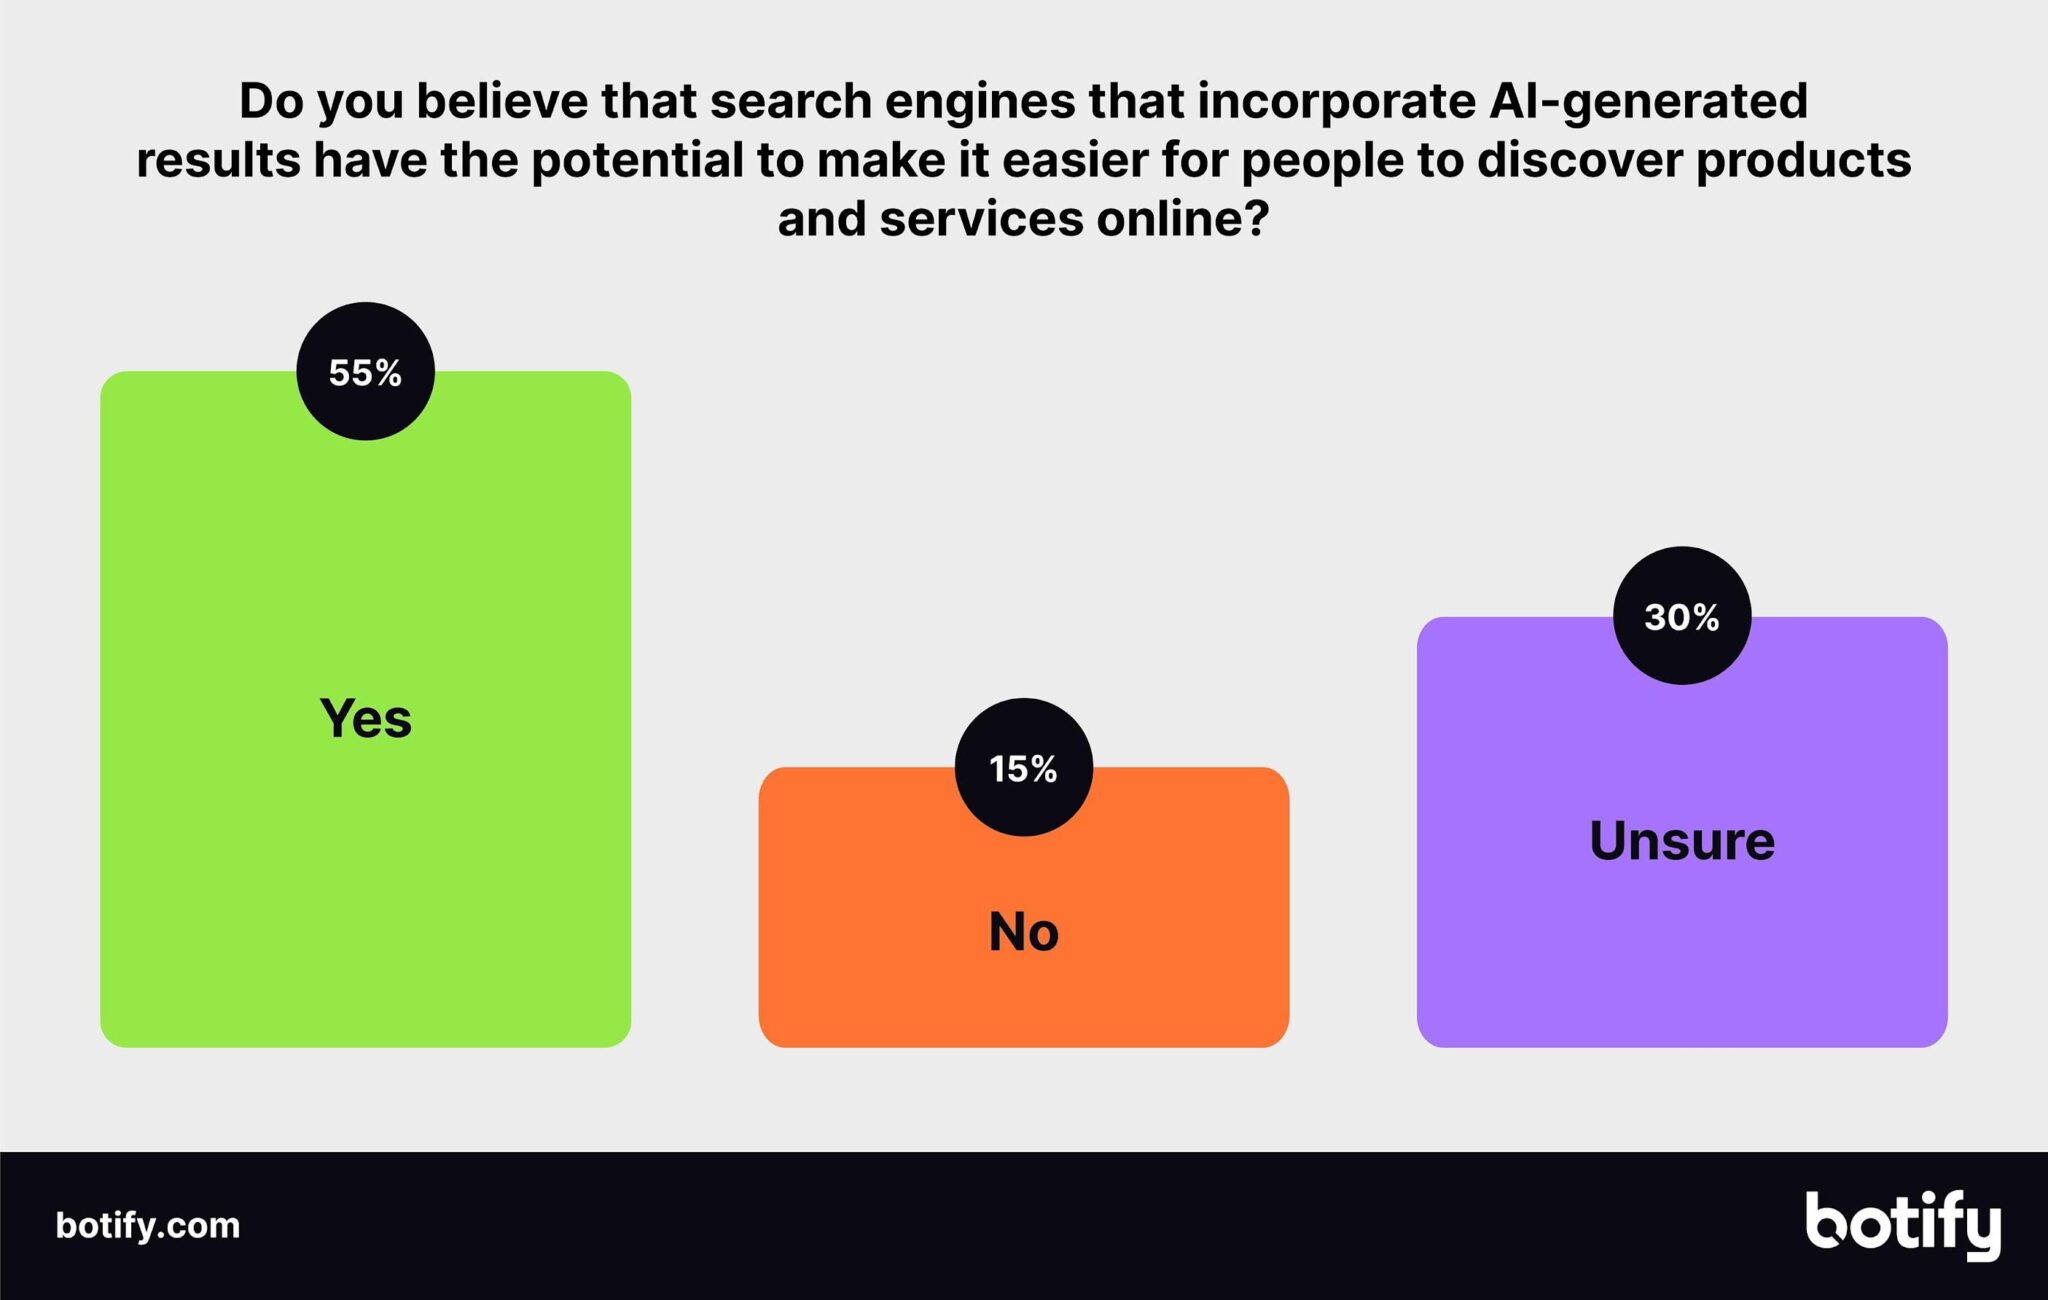 Do you believe that search engines that incorporate AI-generated results have the potential to make it easier for people to discover products and services online?